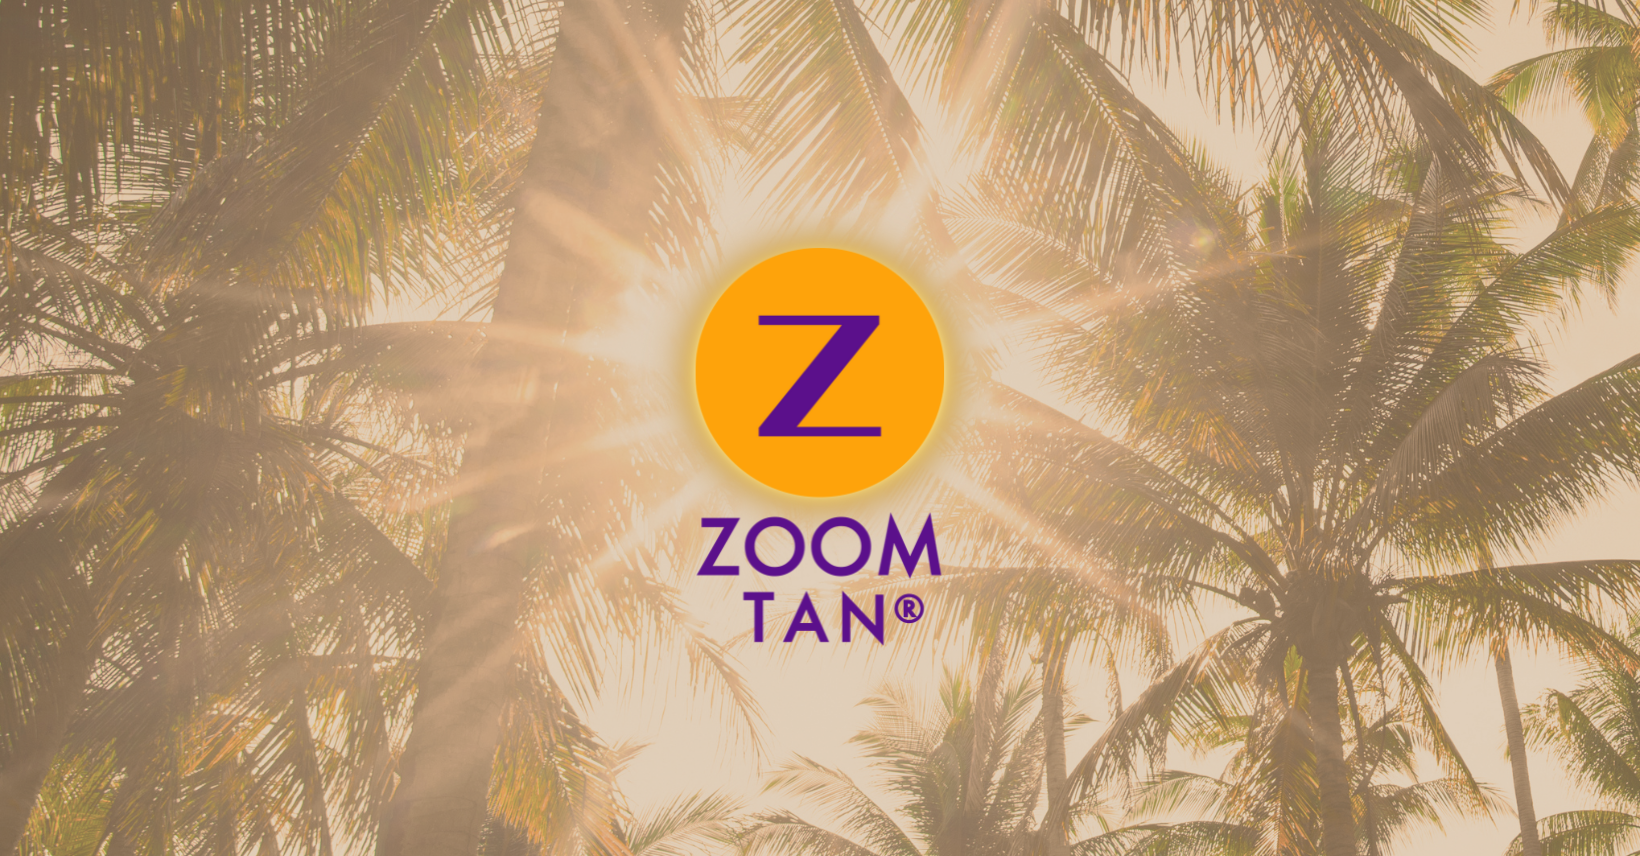 Zoom Tan 102 Towne Dr, Fayetteville New York 13066